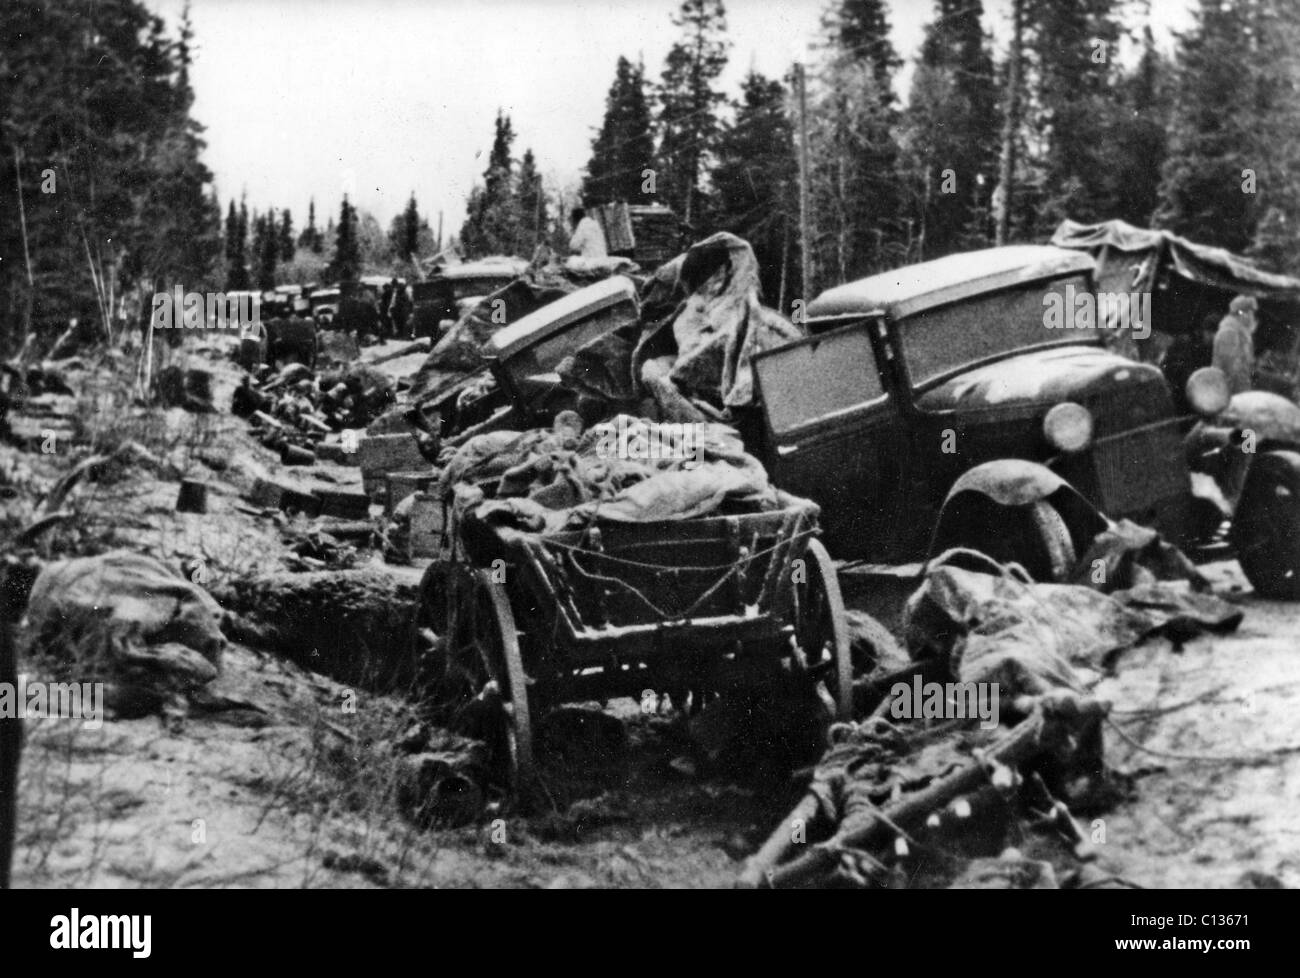 WINTER WAR 1939-1940 Soviet equipment and bodies after the Battle of Raate, Finland,  in January 1940 Stock Photo